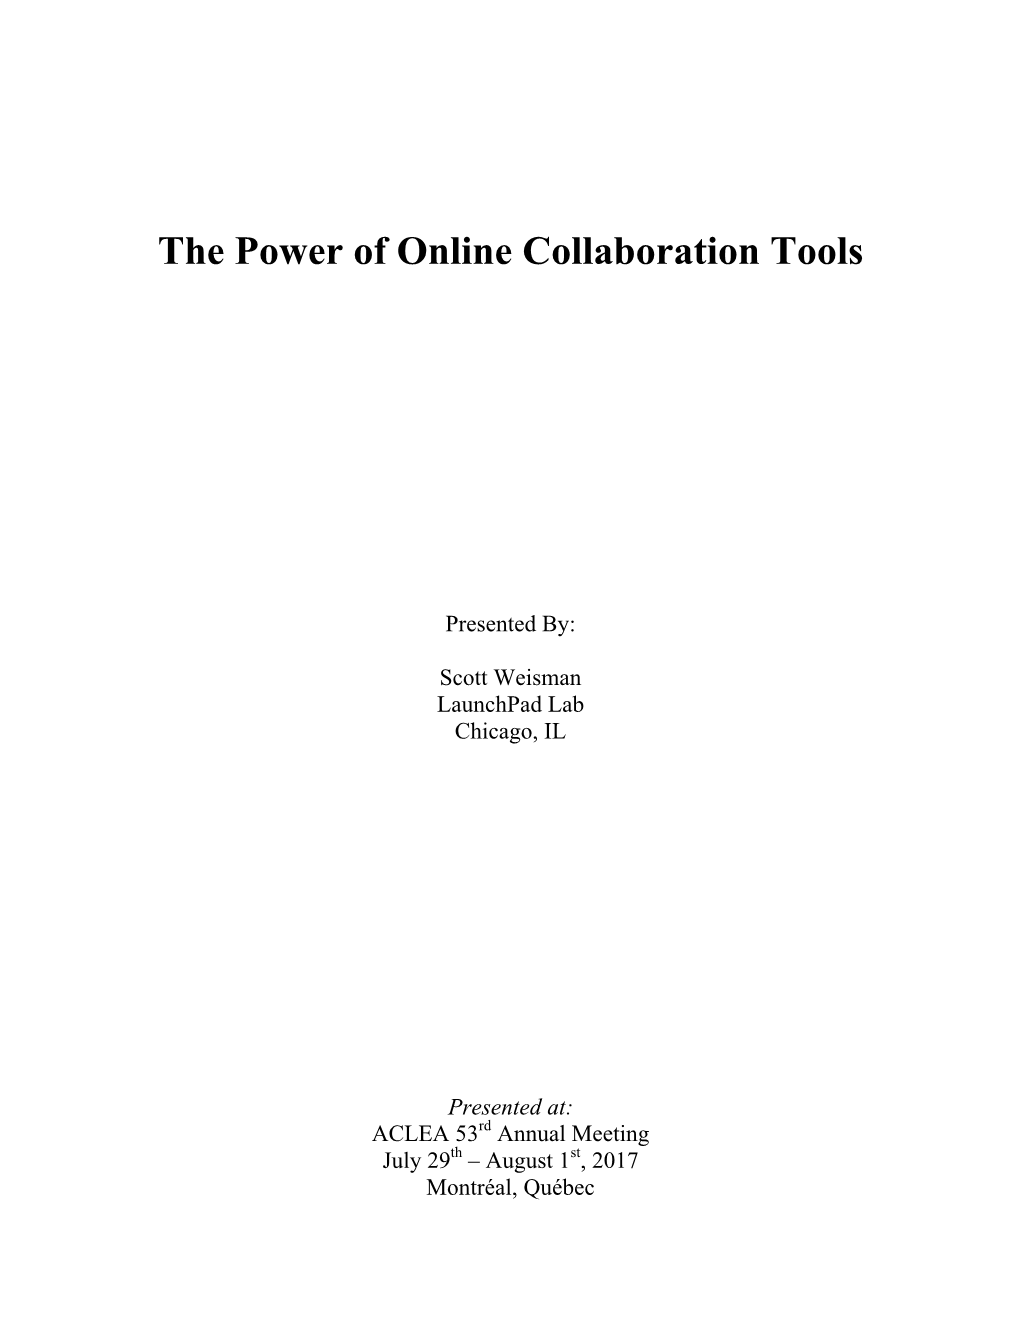 The Power of Online Collaboration Tools